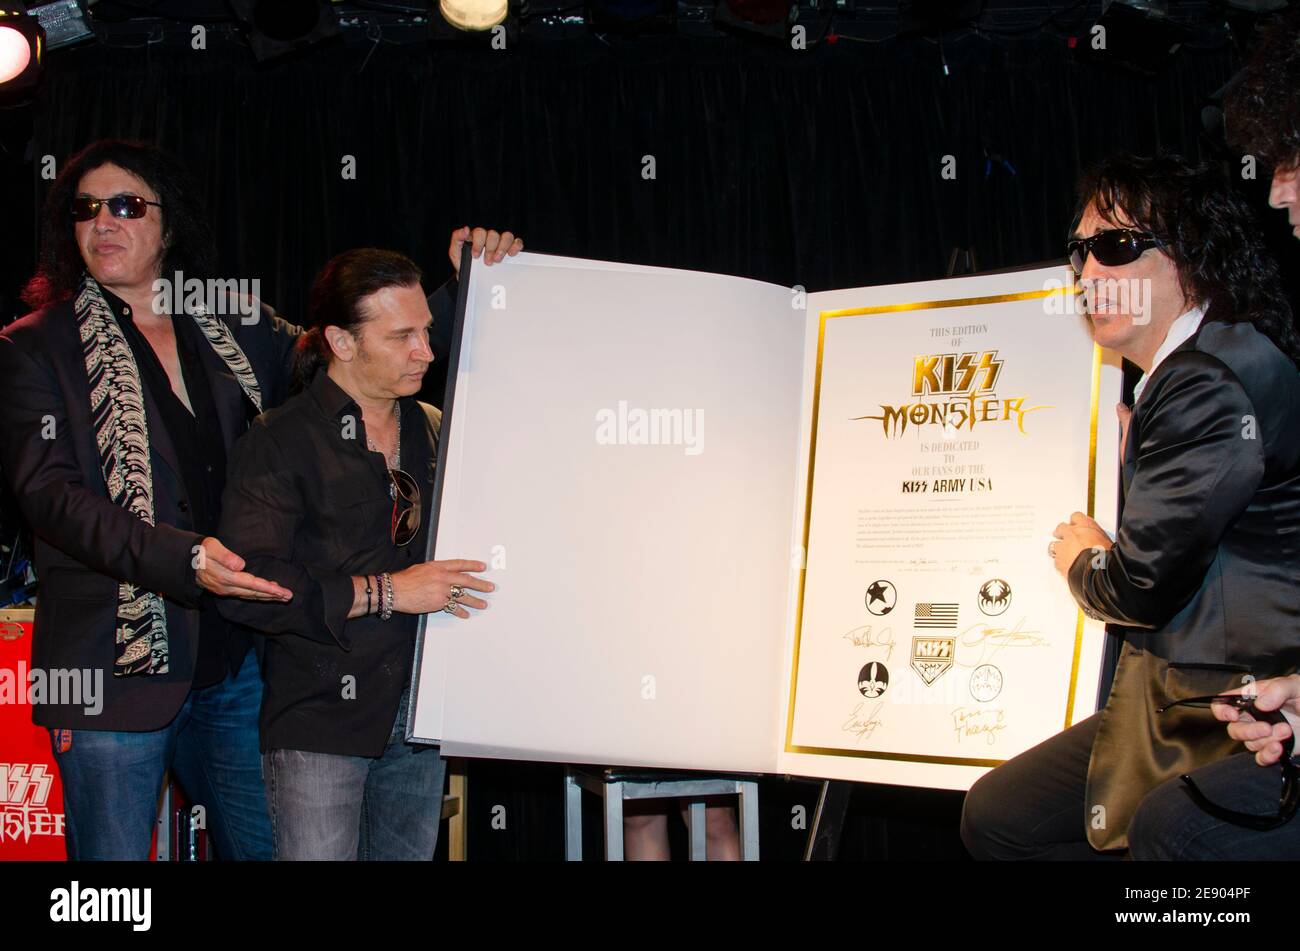 August 21, 2012: (L-R) Gene Simmons, Eric Singer and Paul Stanley of the Rock Band KISS attend the launch of the KISS Monster Book. (Credit Image: © Billy Bennight/ZUMA Wire) Stock Photo